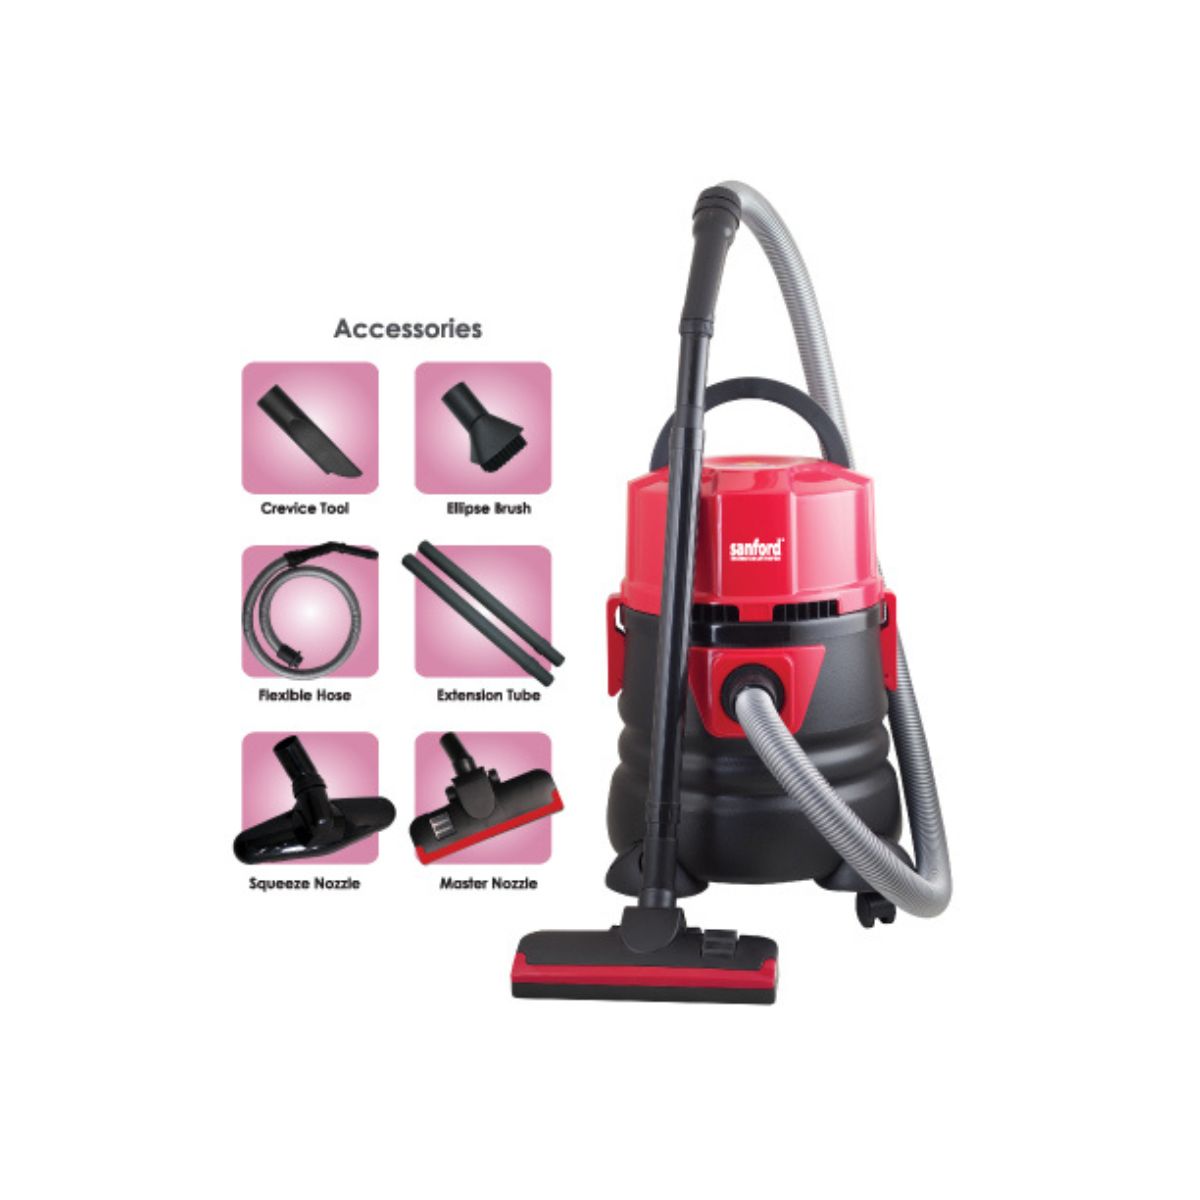 Sanford Vacuum Cleaner Wet And Dry - SF894VC - 23L - Red